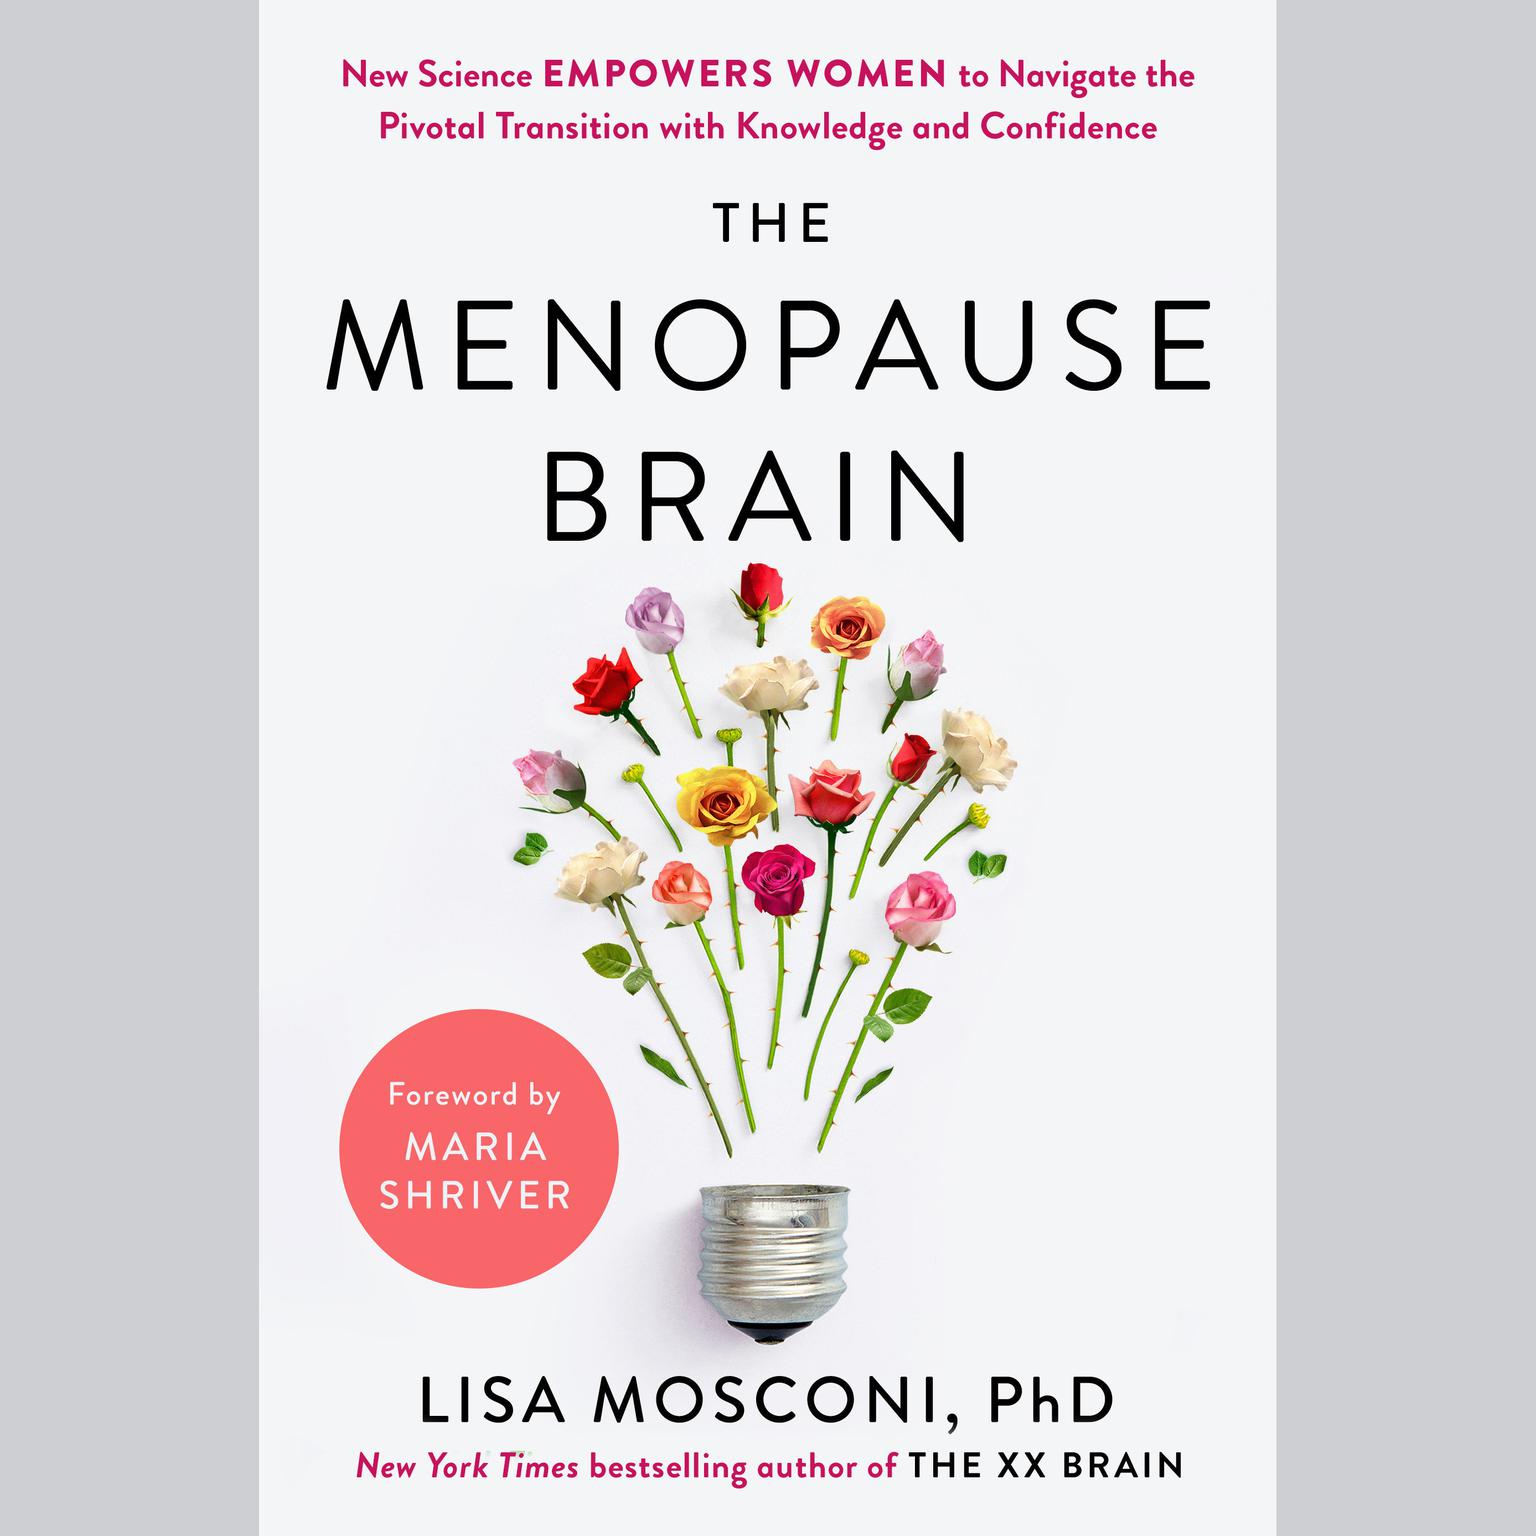 The Menopause Brain: New Science Empowers Women to Navigate the Pivotal Transition with Knowledge and Confidence Audiobook, by Lisa Mosconi